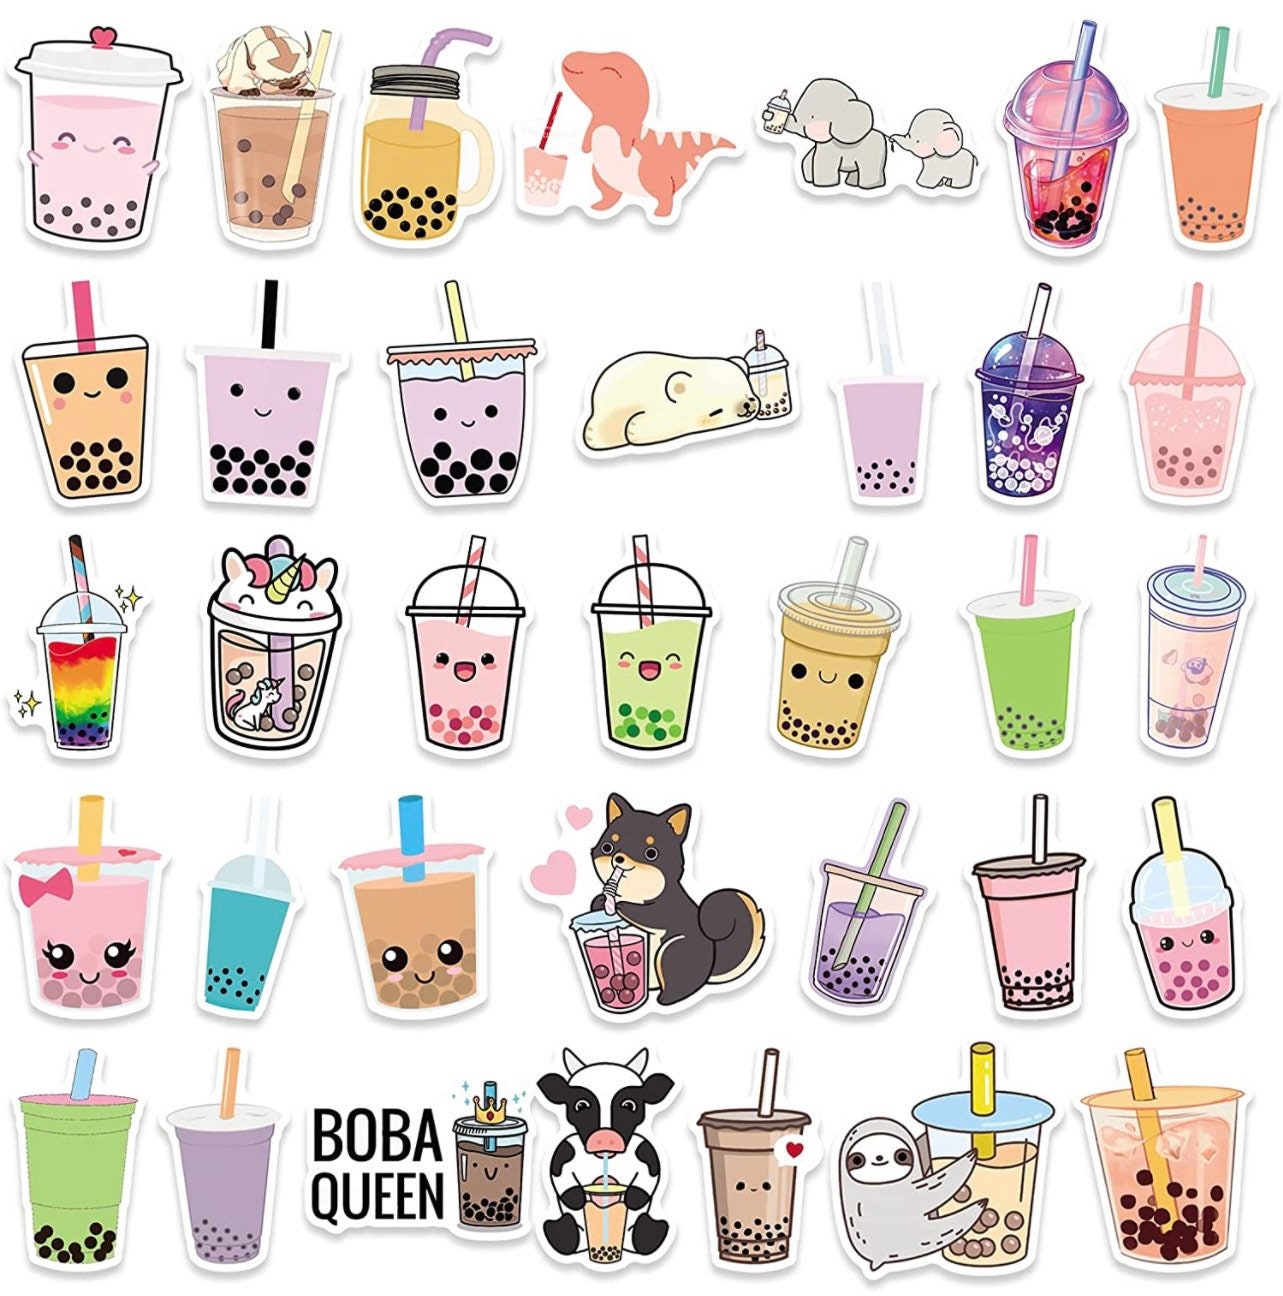 100 Pieces Boba Stickers, Cute Bubble Tea Stickers, Kawaii Drink Decals  Waterproof Vinyl Gifts for Phone, Laptop, Water 